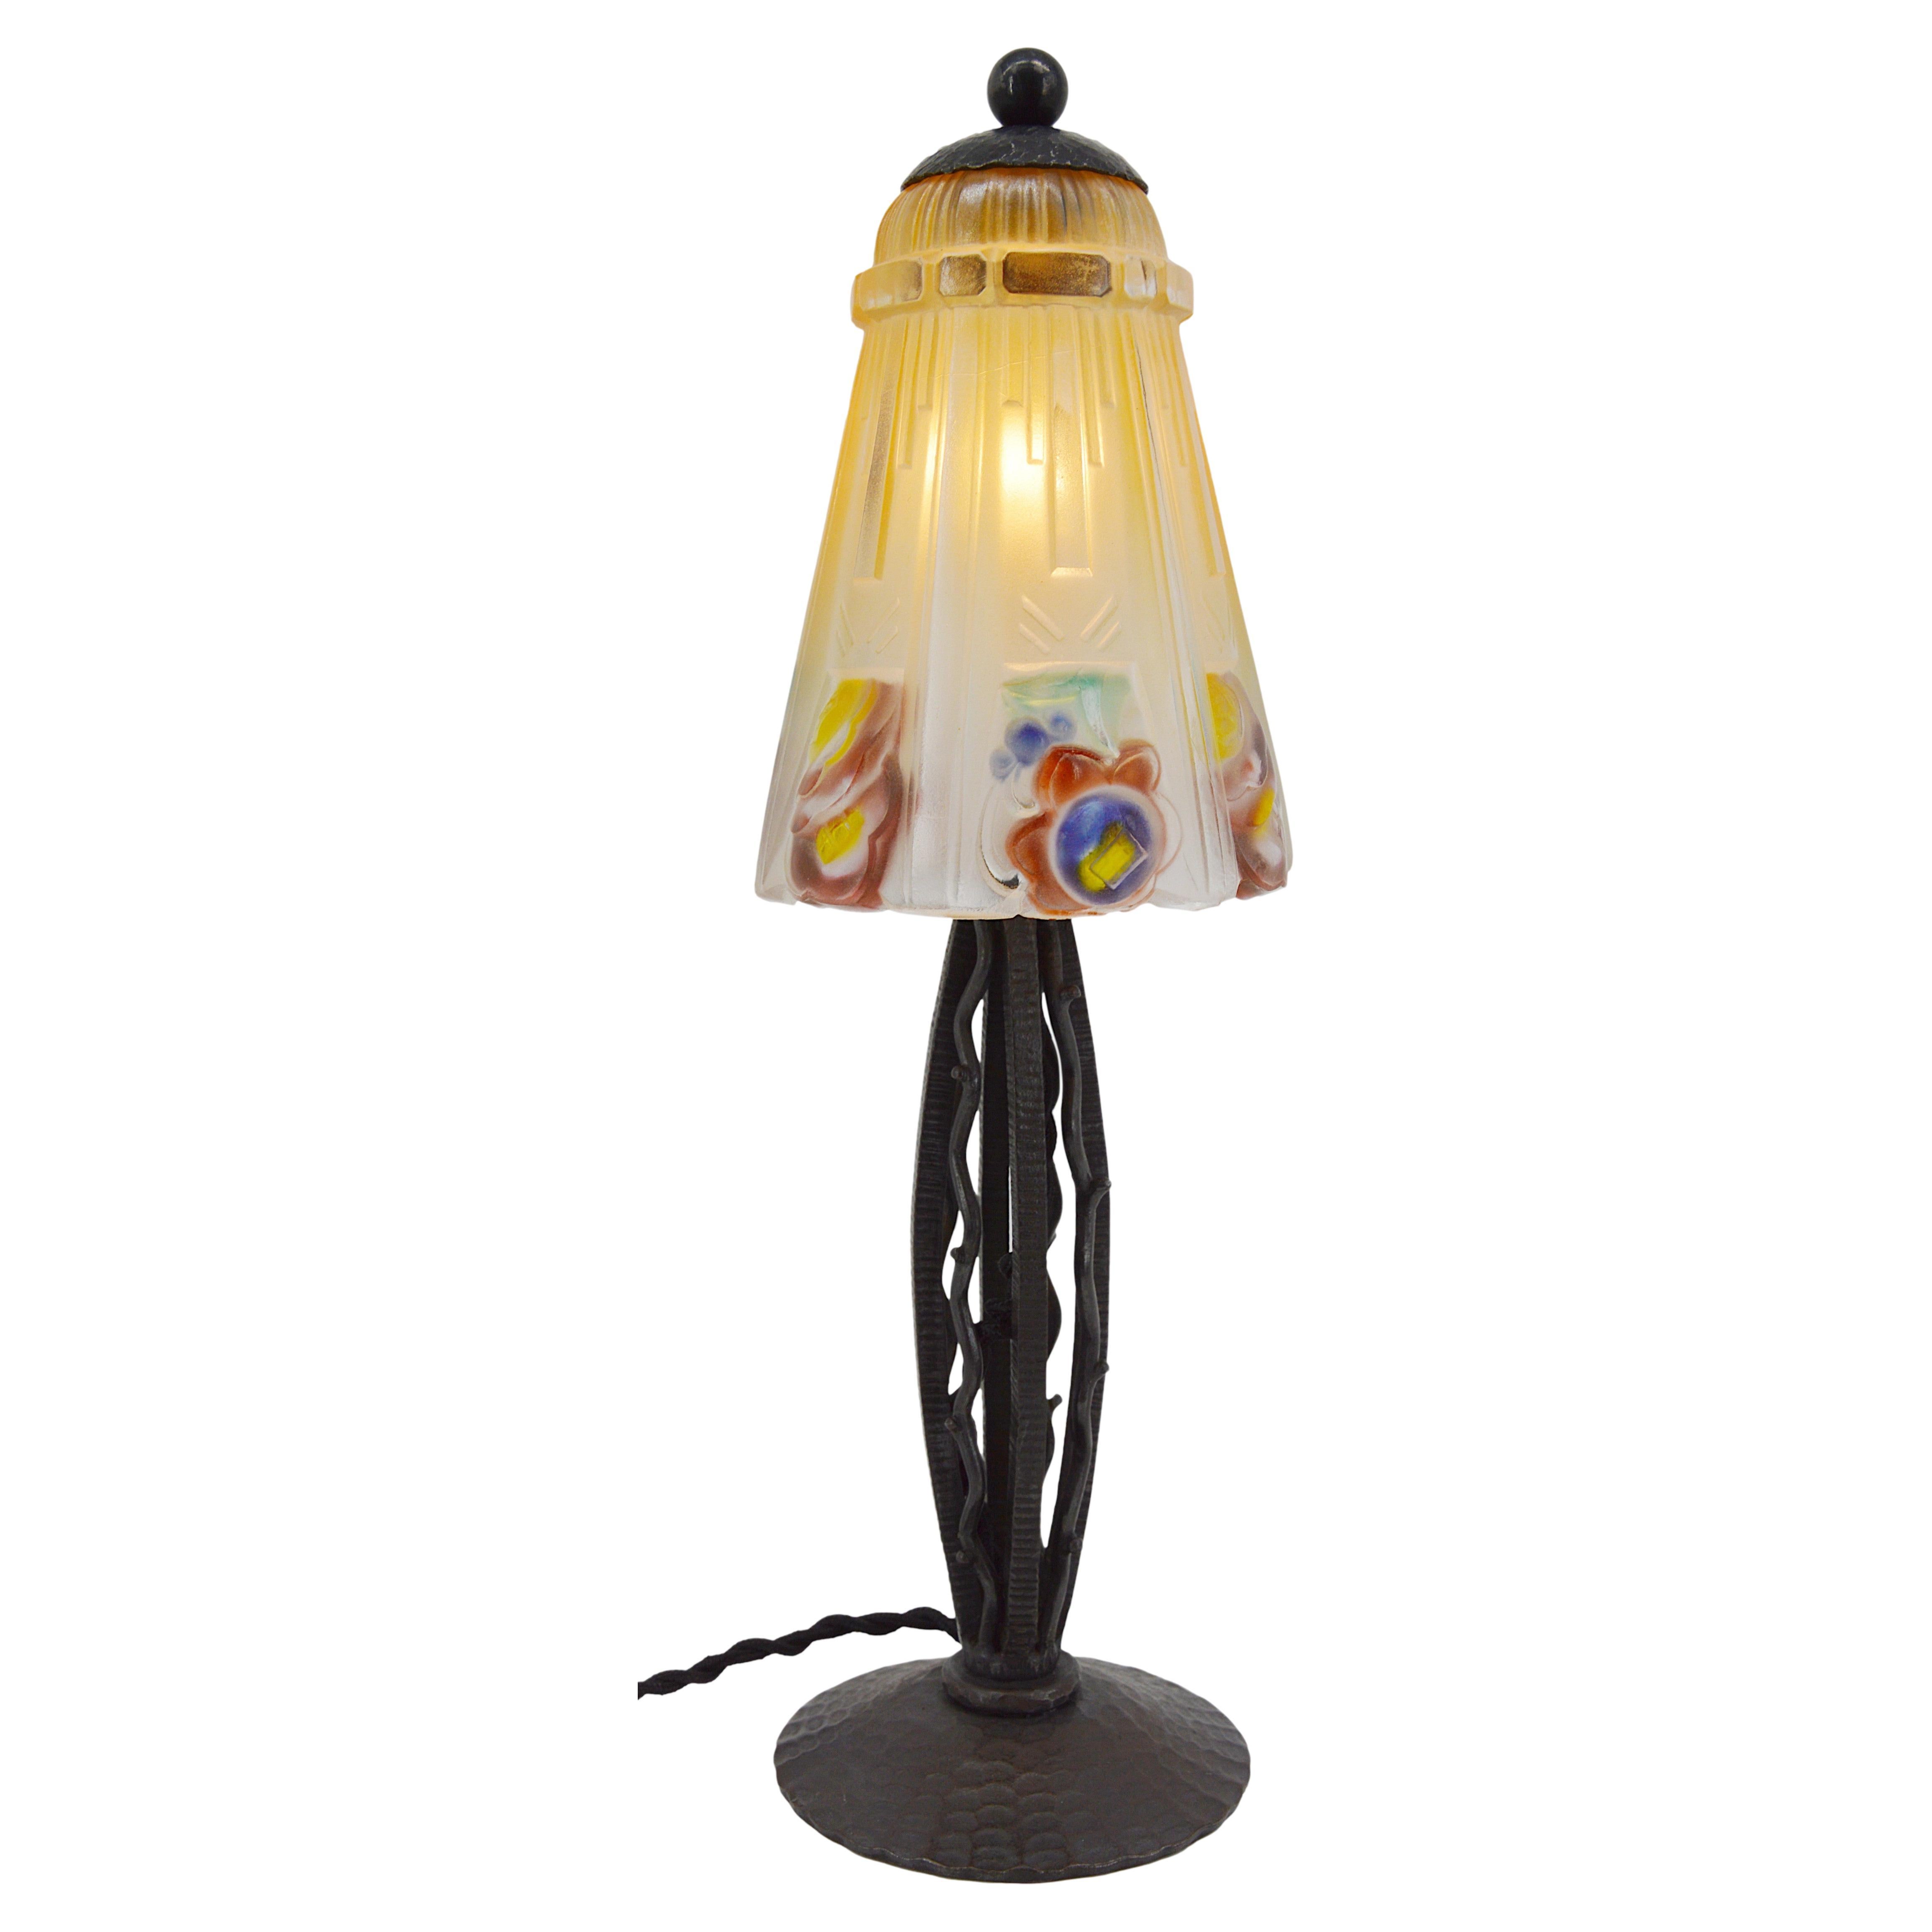 Jean Gauthier French Art Deco Table Lamp, 1920s